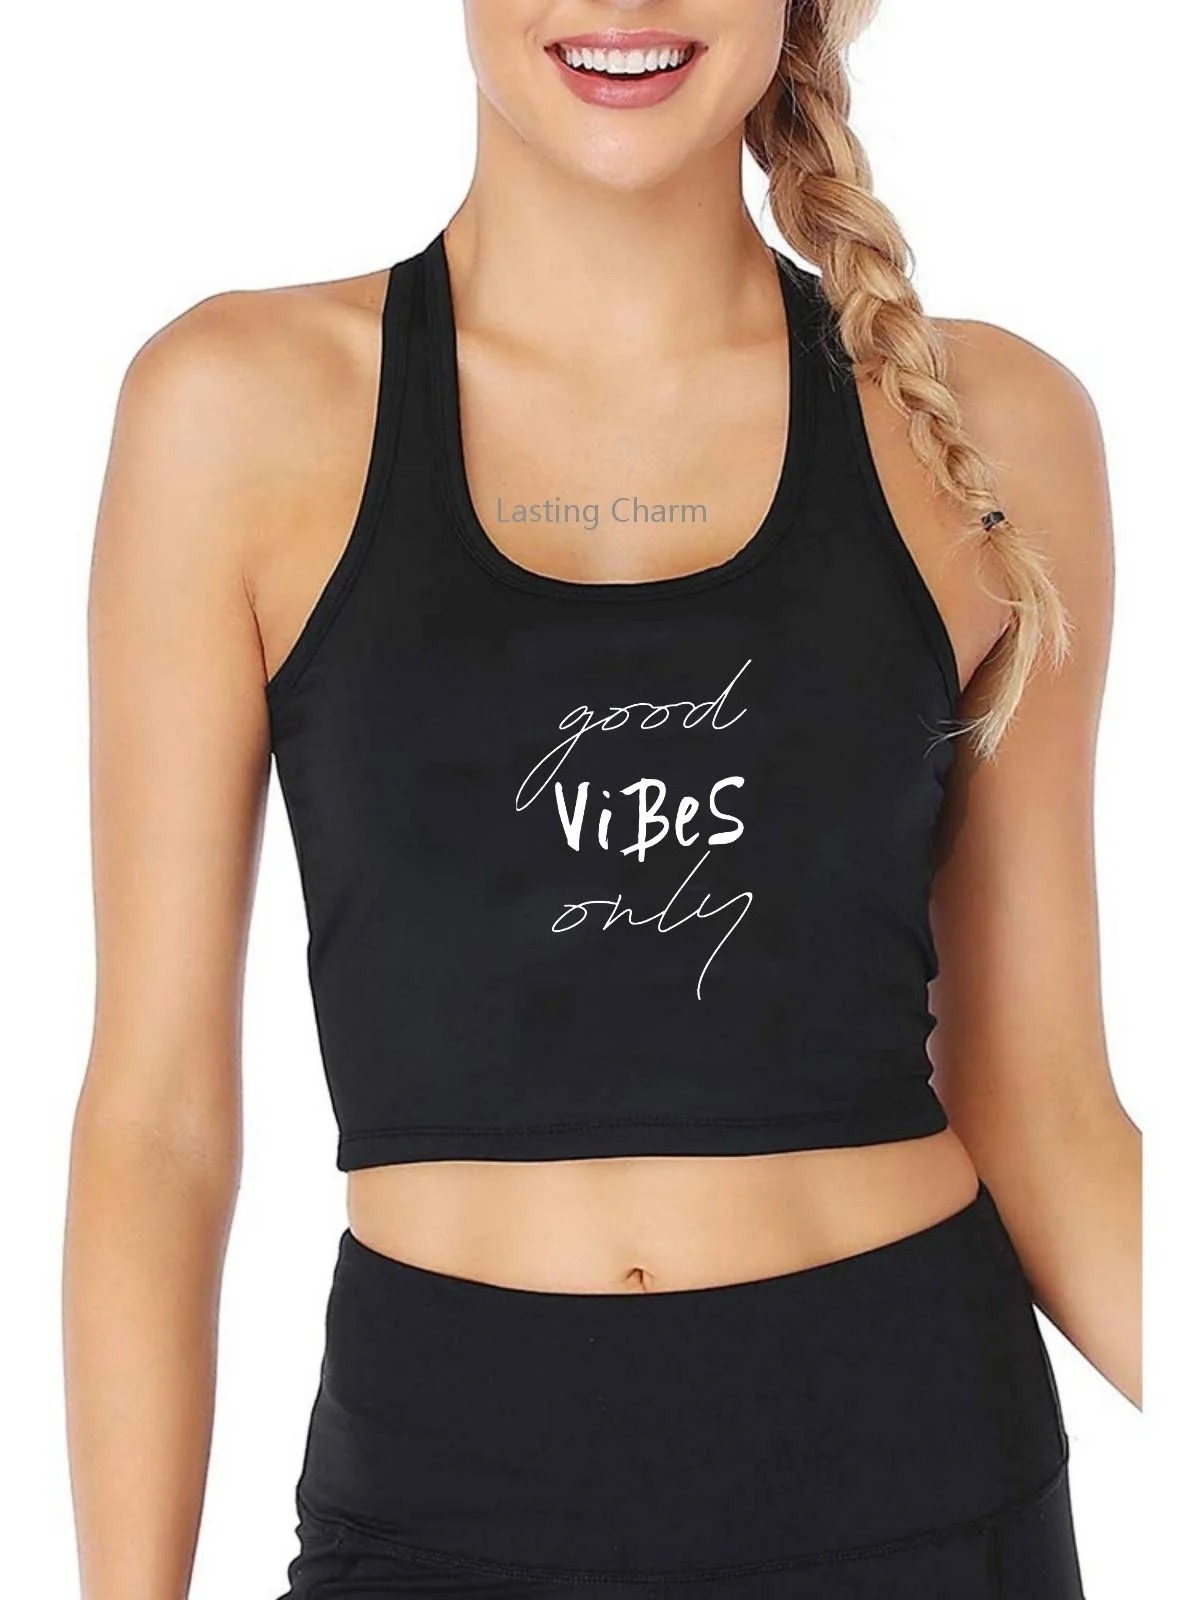 

Good Vibes Only Design Breathable Slim Fit Tank Top Women's Customization Yoga Sports Training Crop Tops